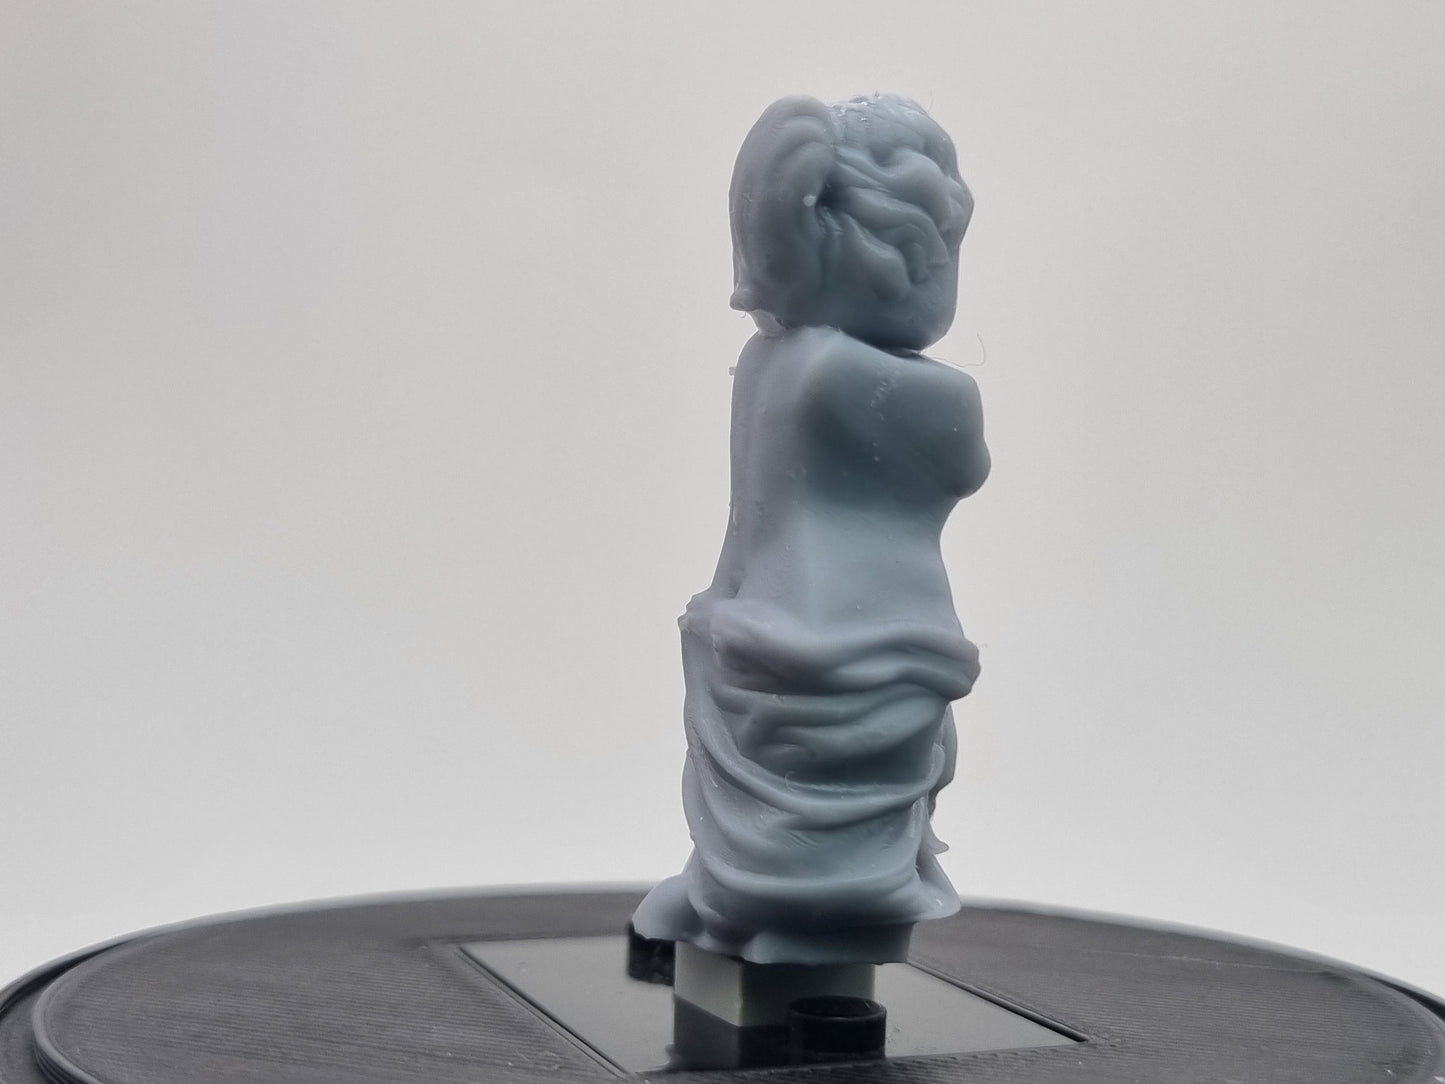 Building toy custom 3D printed stone statue!